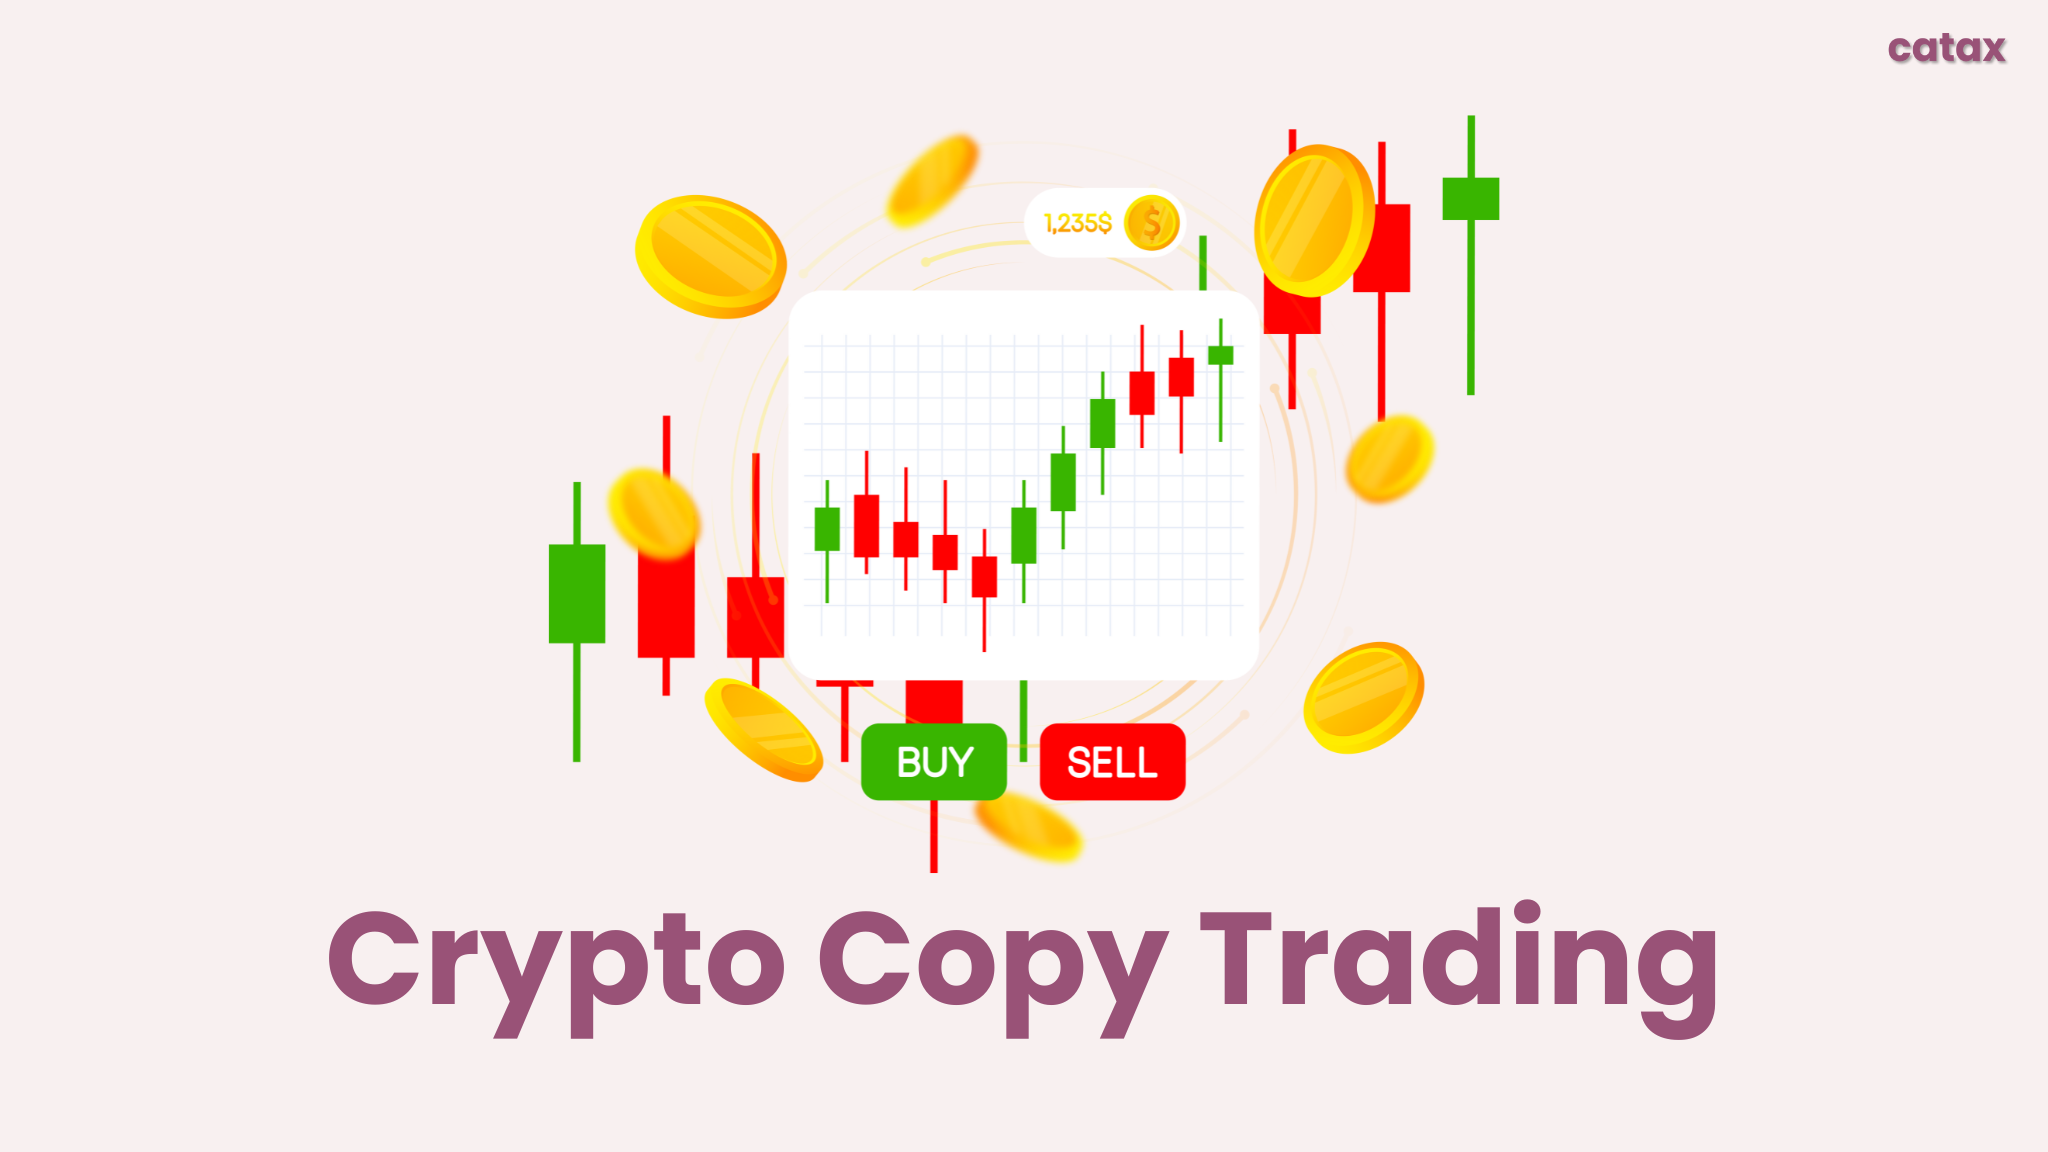 How to Start with Crypto Copy Trading